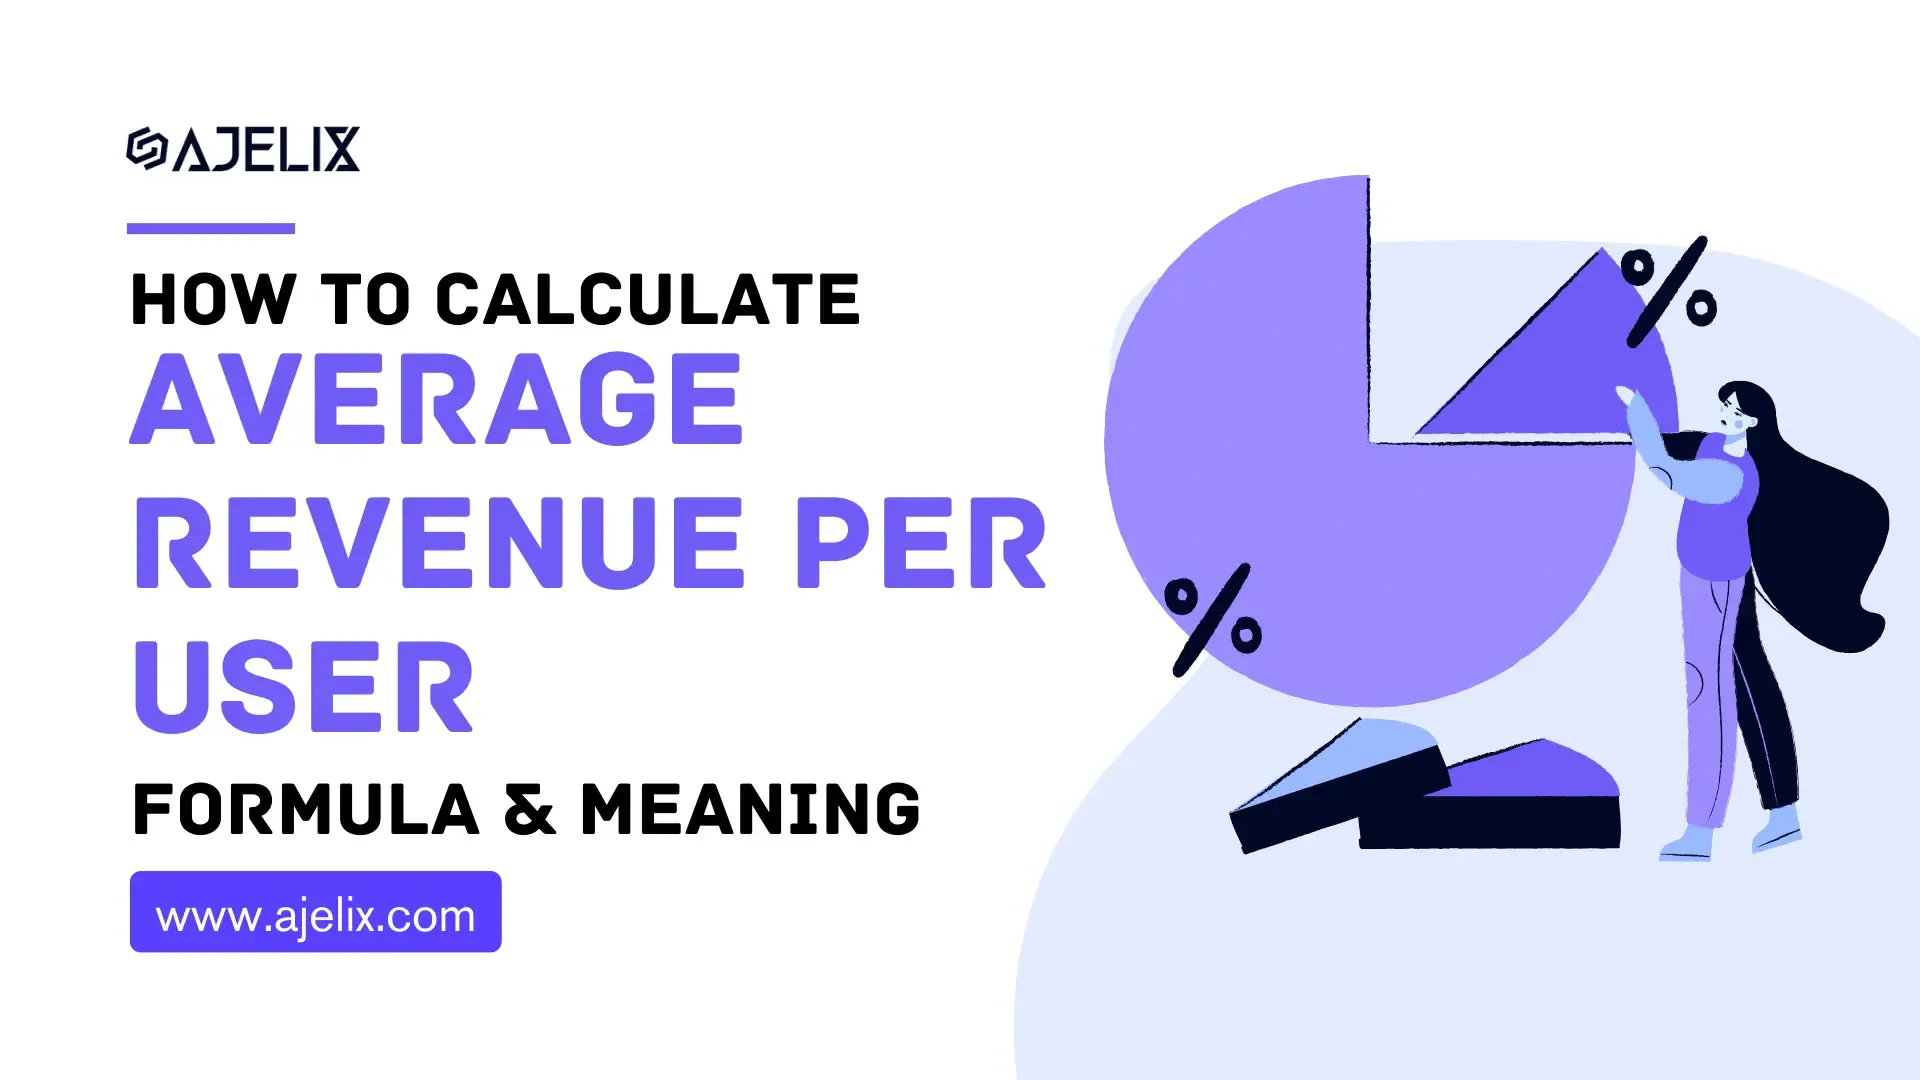 How to calculate average revenue per user formula & meaning example banner